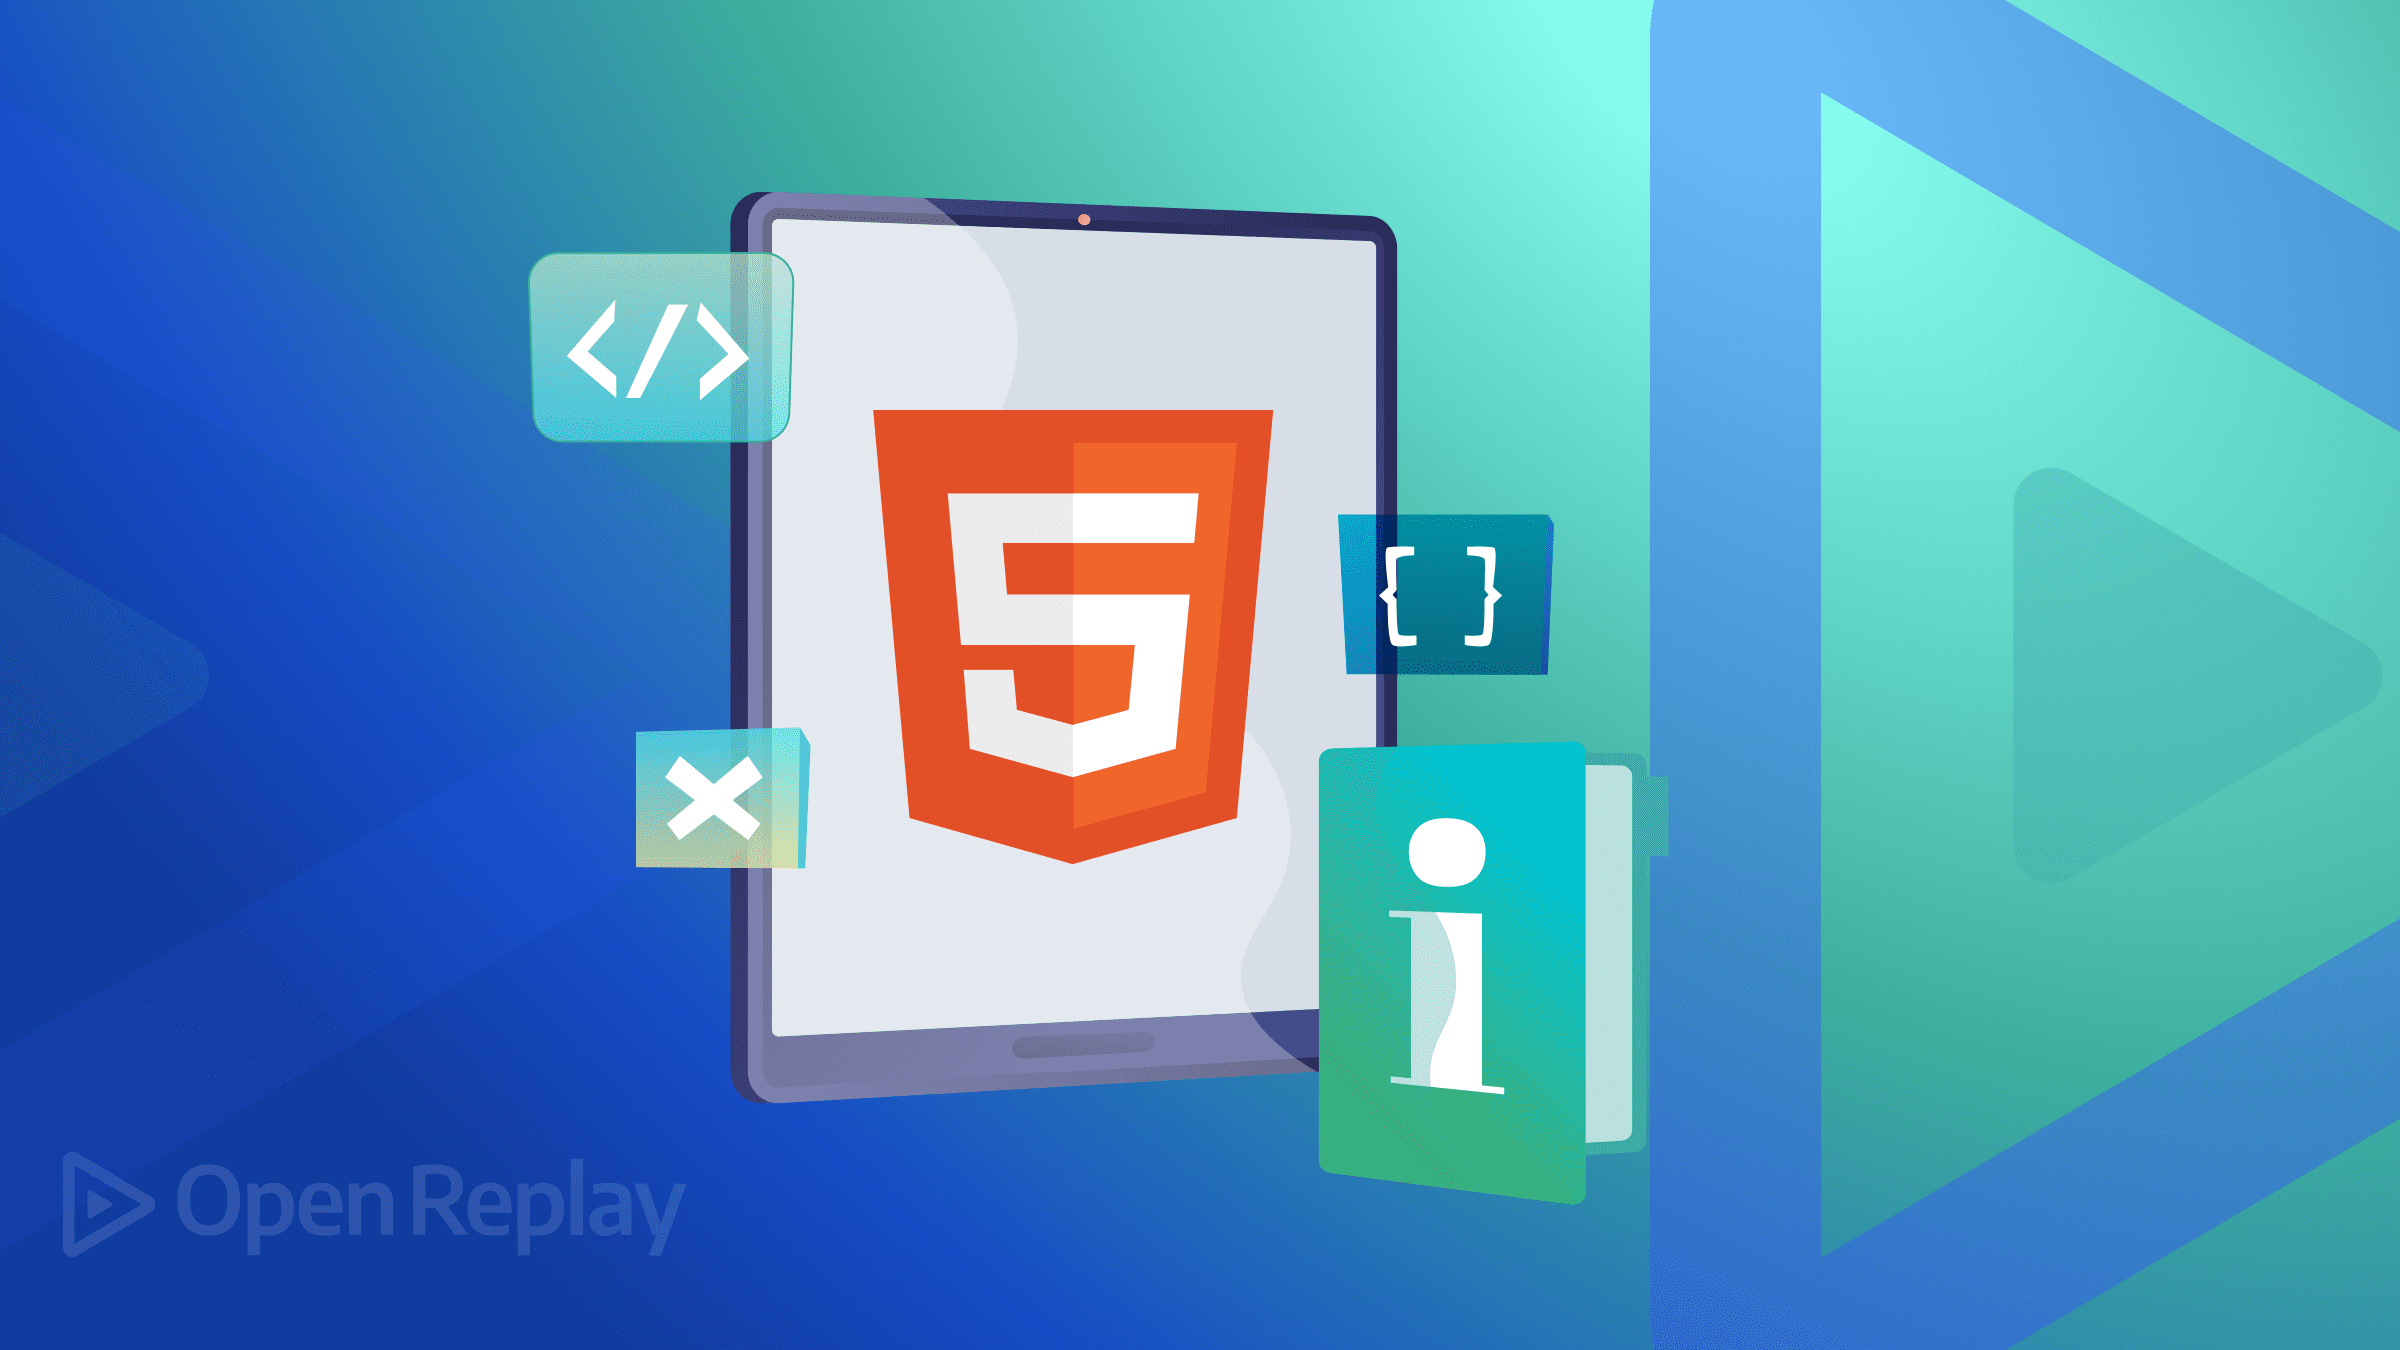 A complete guide to CSS fundamentals